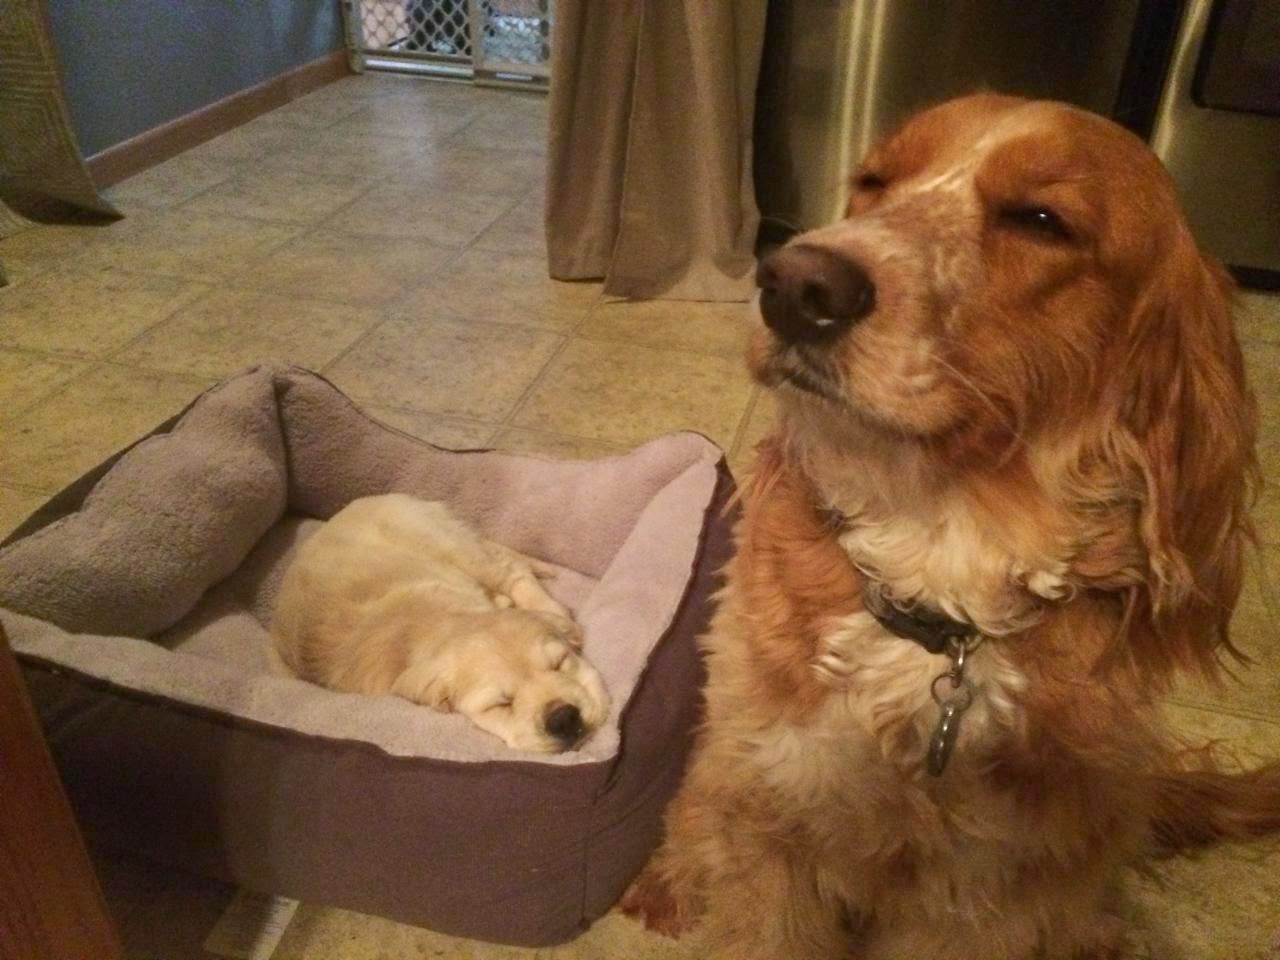 Olaf with his new friend who is a Golden/Cocker, Piper.